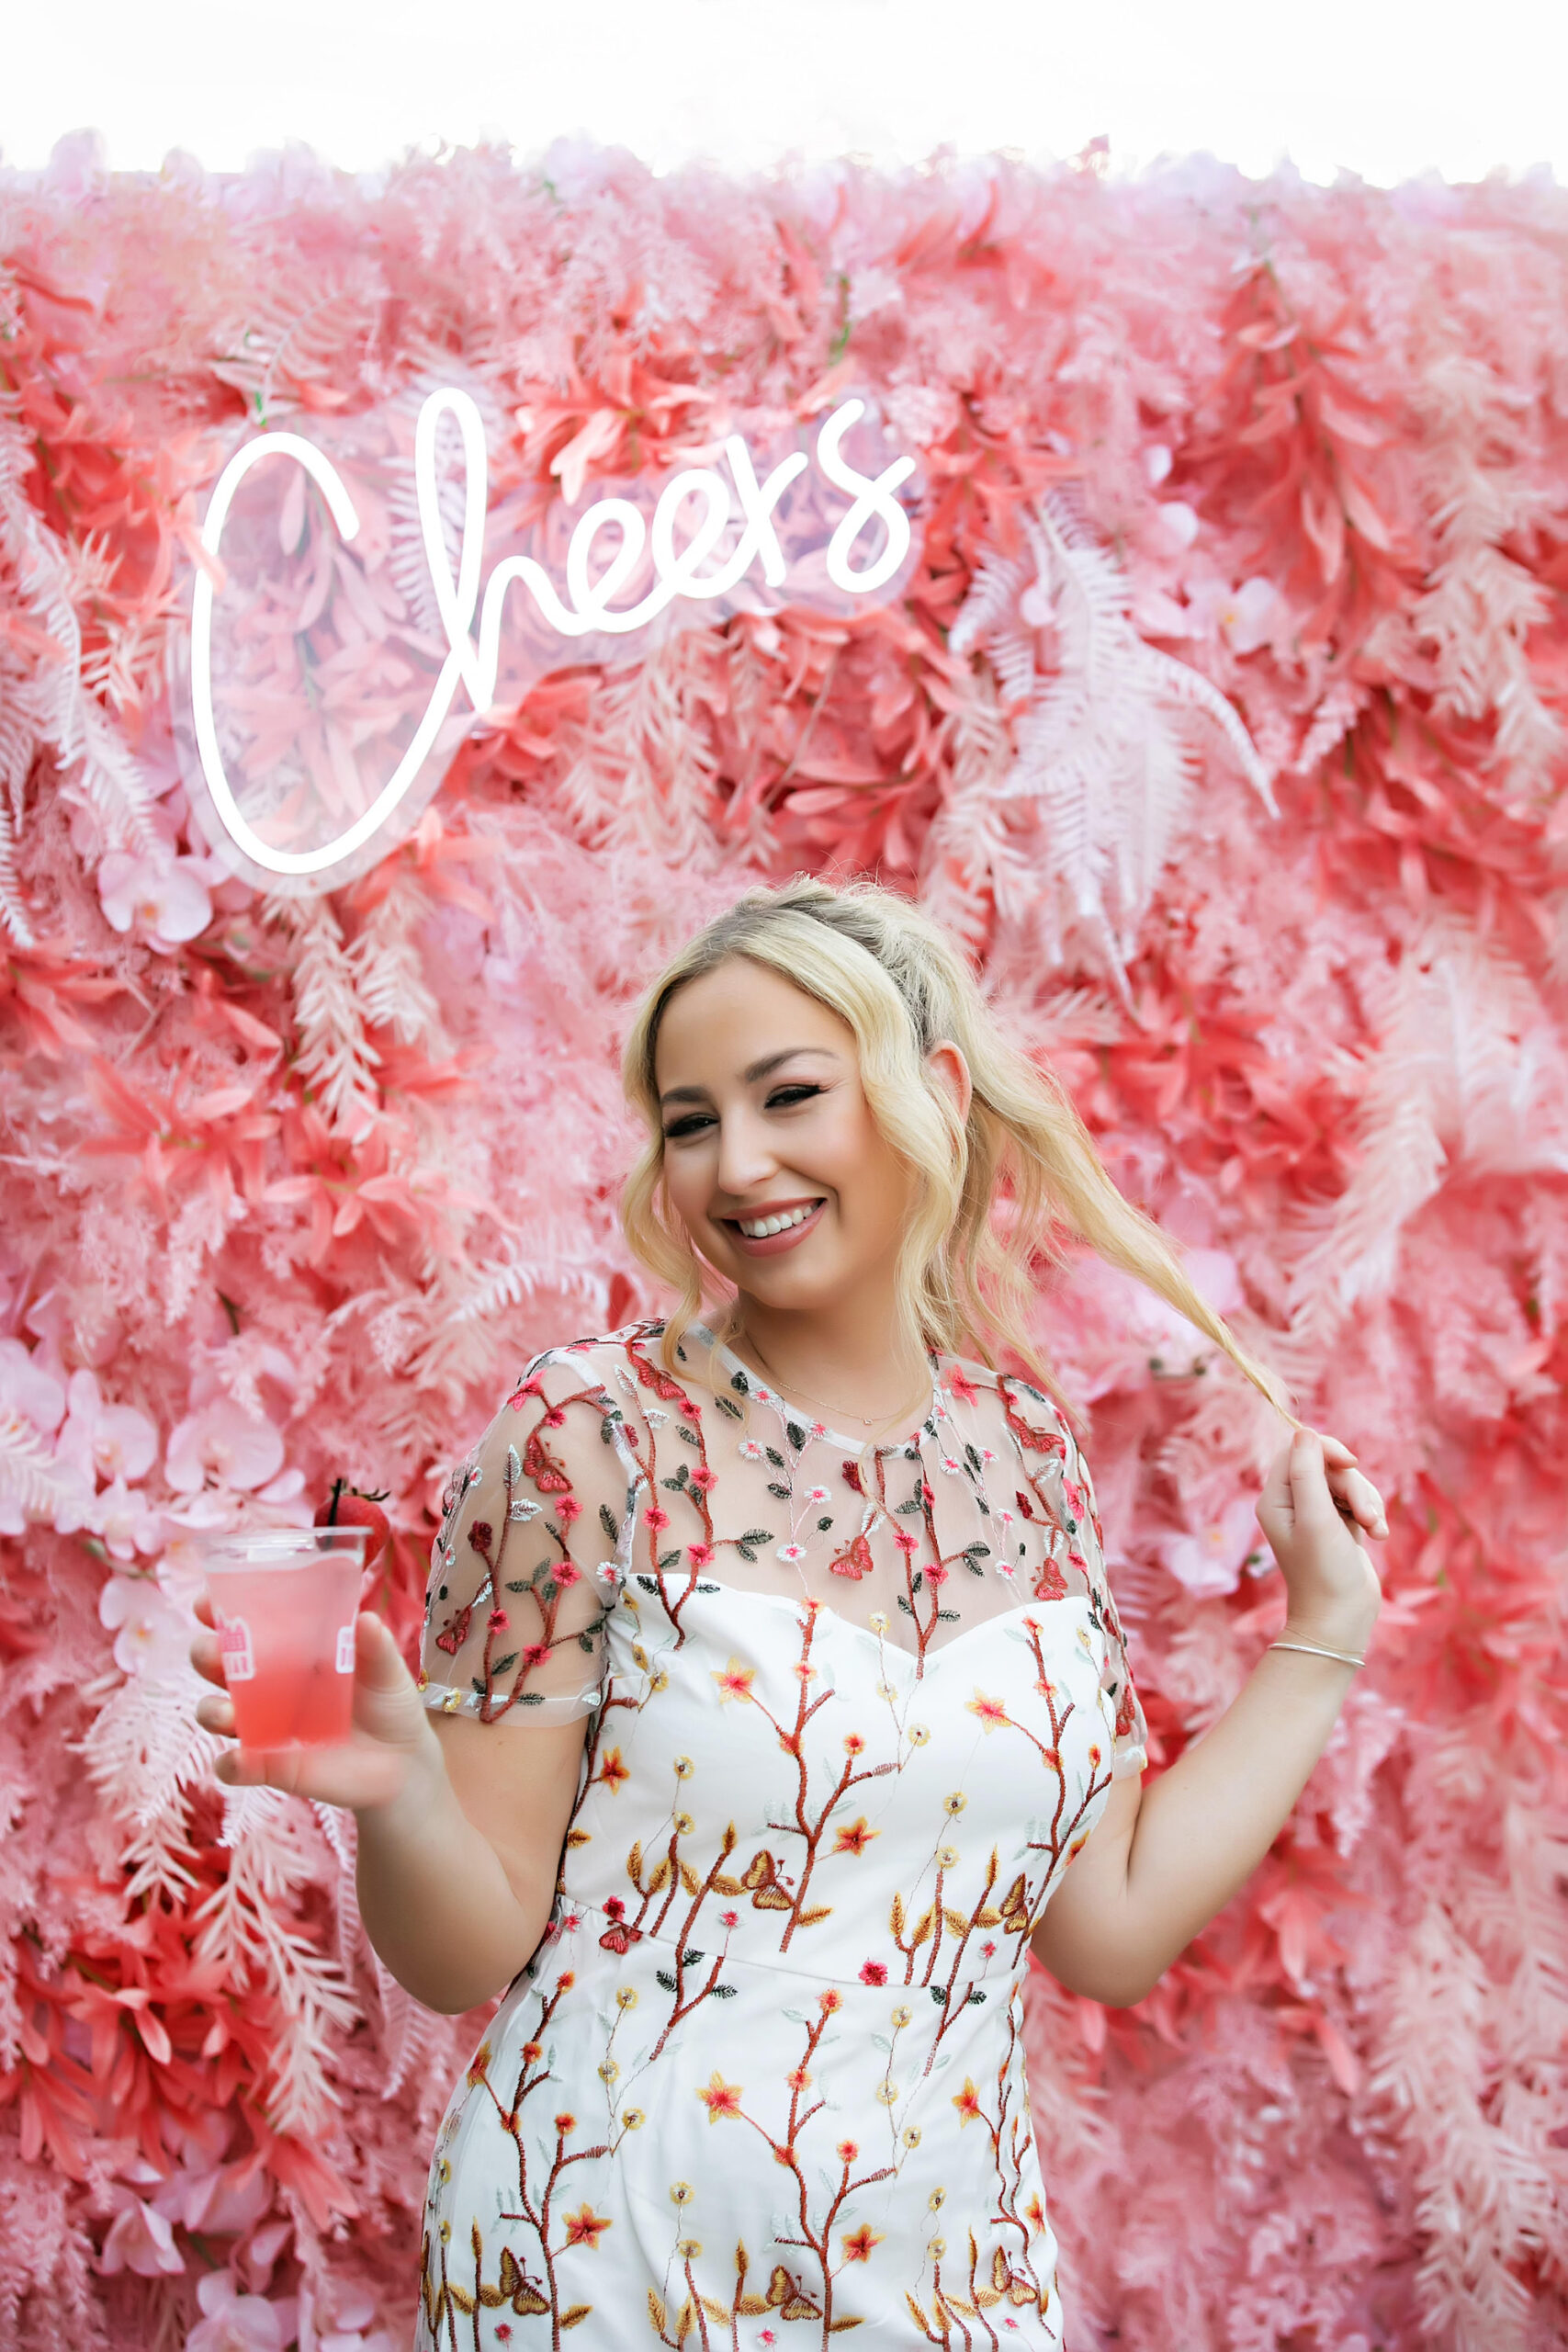 Bride Short Sleeve Party Dress | Pink Flamingo Themed Flower Photo Wall for Wedding Welcome Party Brunch | Tampa Bay Wedding Dress Truly Forever Bridal Tampa | Hair and Makeup Artist Adore Bridal